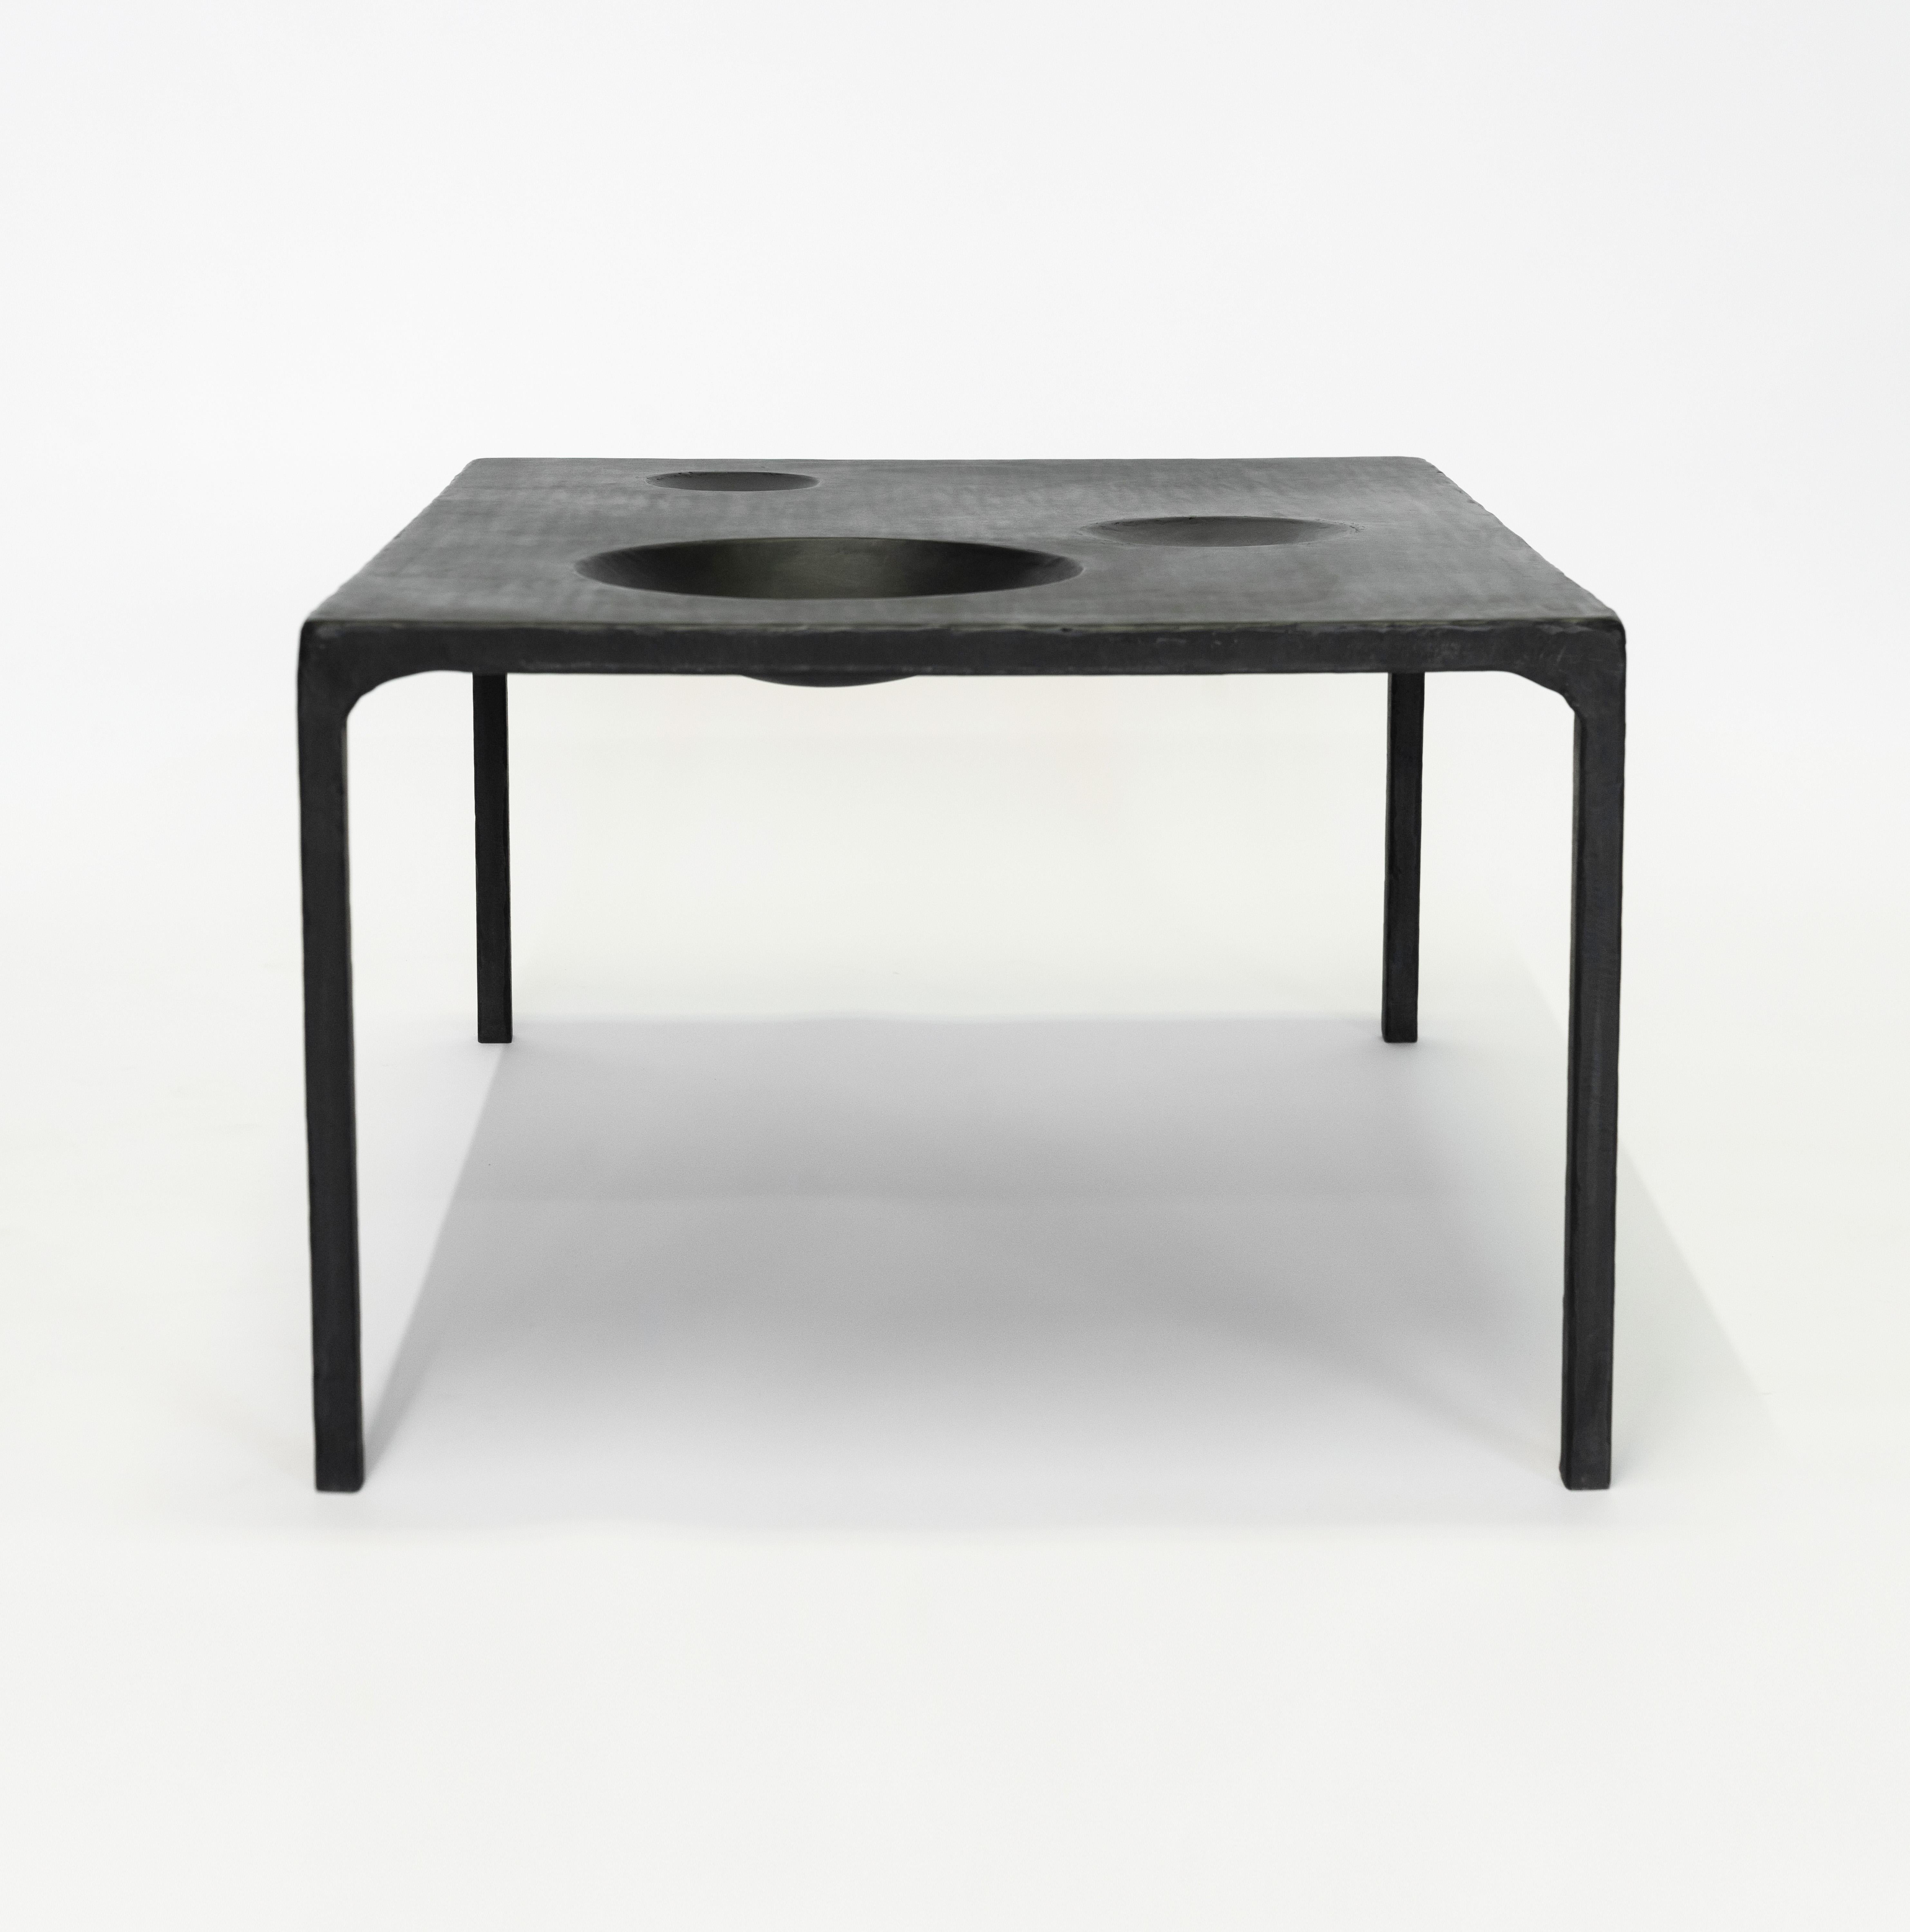 TABLE NO. 11 - SIDE TABLE
J.M. Szymanski
d. 2019
 
Handmade entirely out of blackened and waxed steel, this table features geometric voids within the table itself. Also available with food-safe, ceramic, bowl inserts. Each one is made specifically